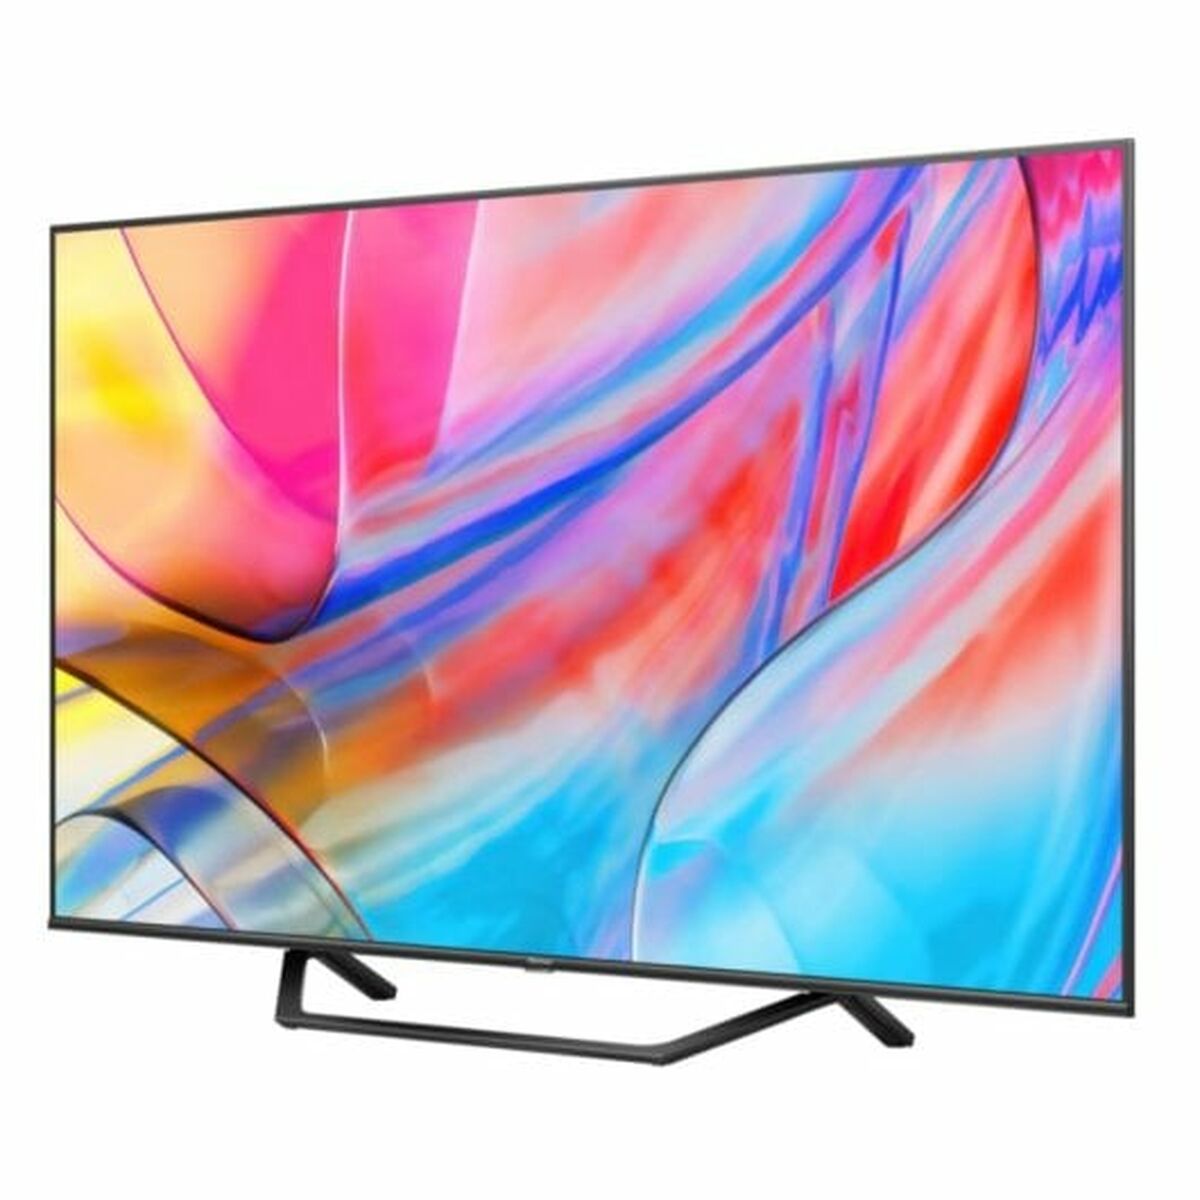 Smart TV Hisense 65A7KQ 4K Ultra HD 43" LED HDR D-LED QLED, Hisense, Electronics, TV, Video and home cinema, smart-tv-hisense-65a7kq-4k-ultra-hd-43-led-hdr-d-led-qled, Brand_Hisense, category-reference-2609, category-reference-2625, category-reference-2931, category-reference-t-18805, category-reference-t-18827, category-reference-t-19653, cinema and television, Condition_NEW, entertainment, Price_400 - 500, RiotNook